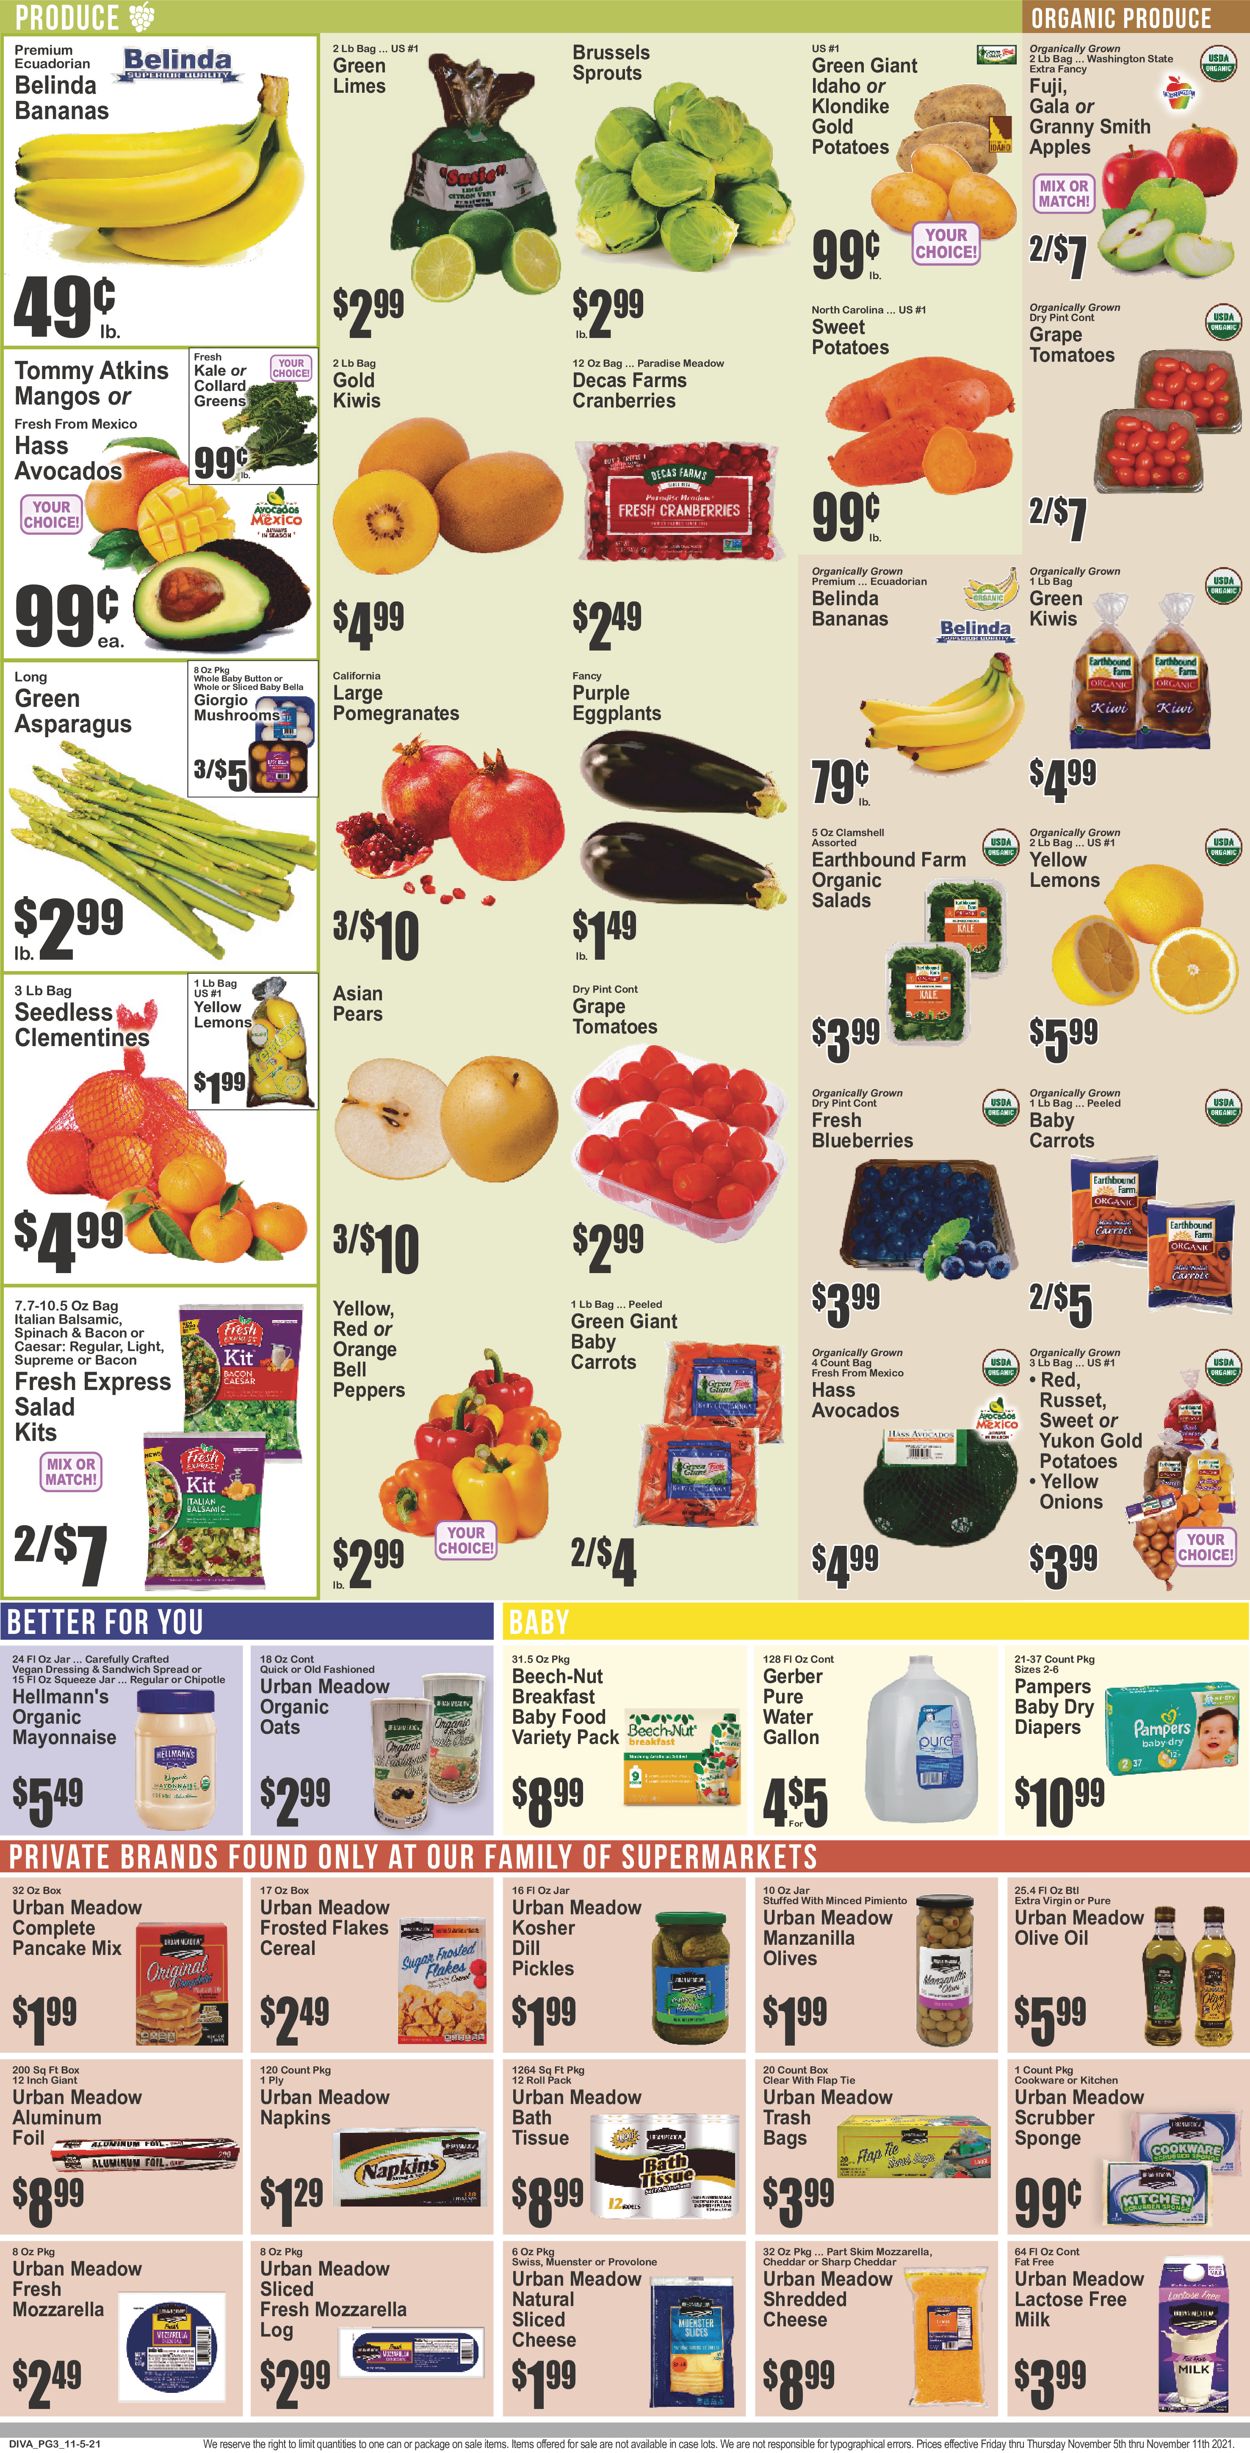 Key Food Ad from 11/05/2021